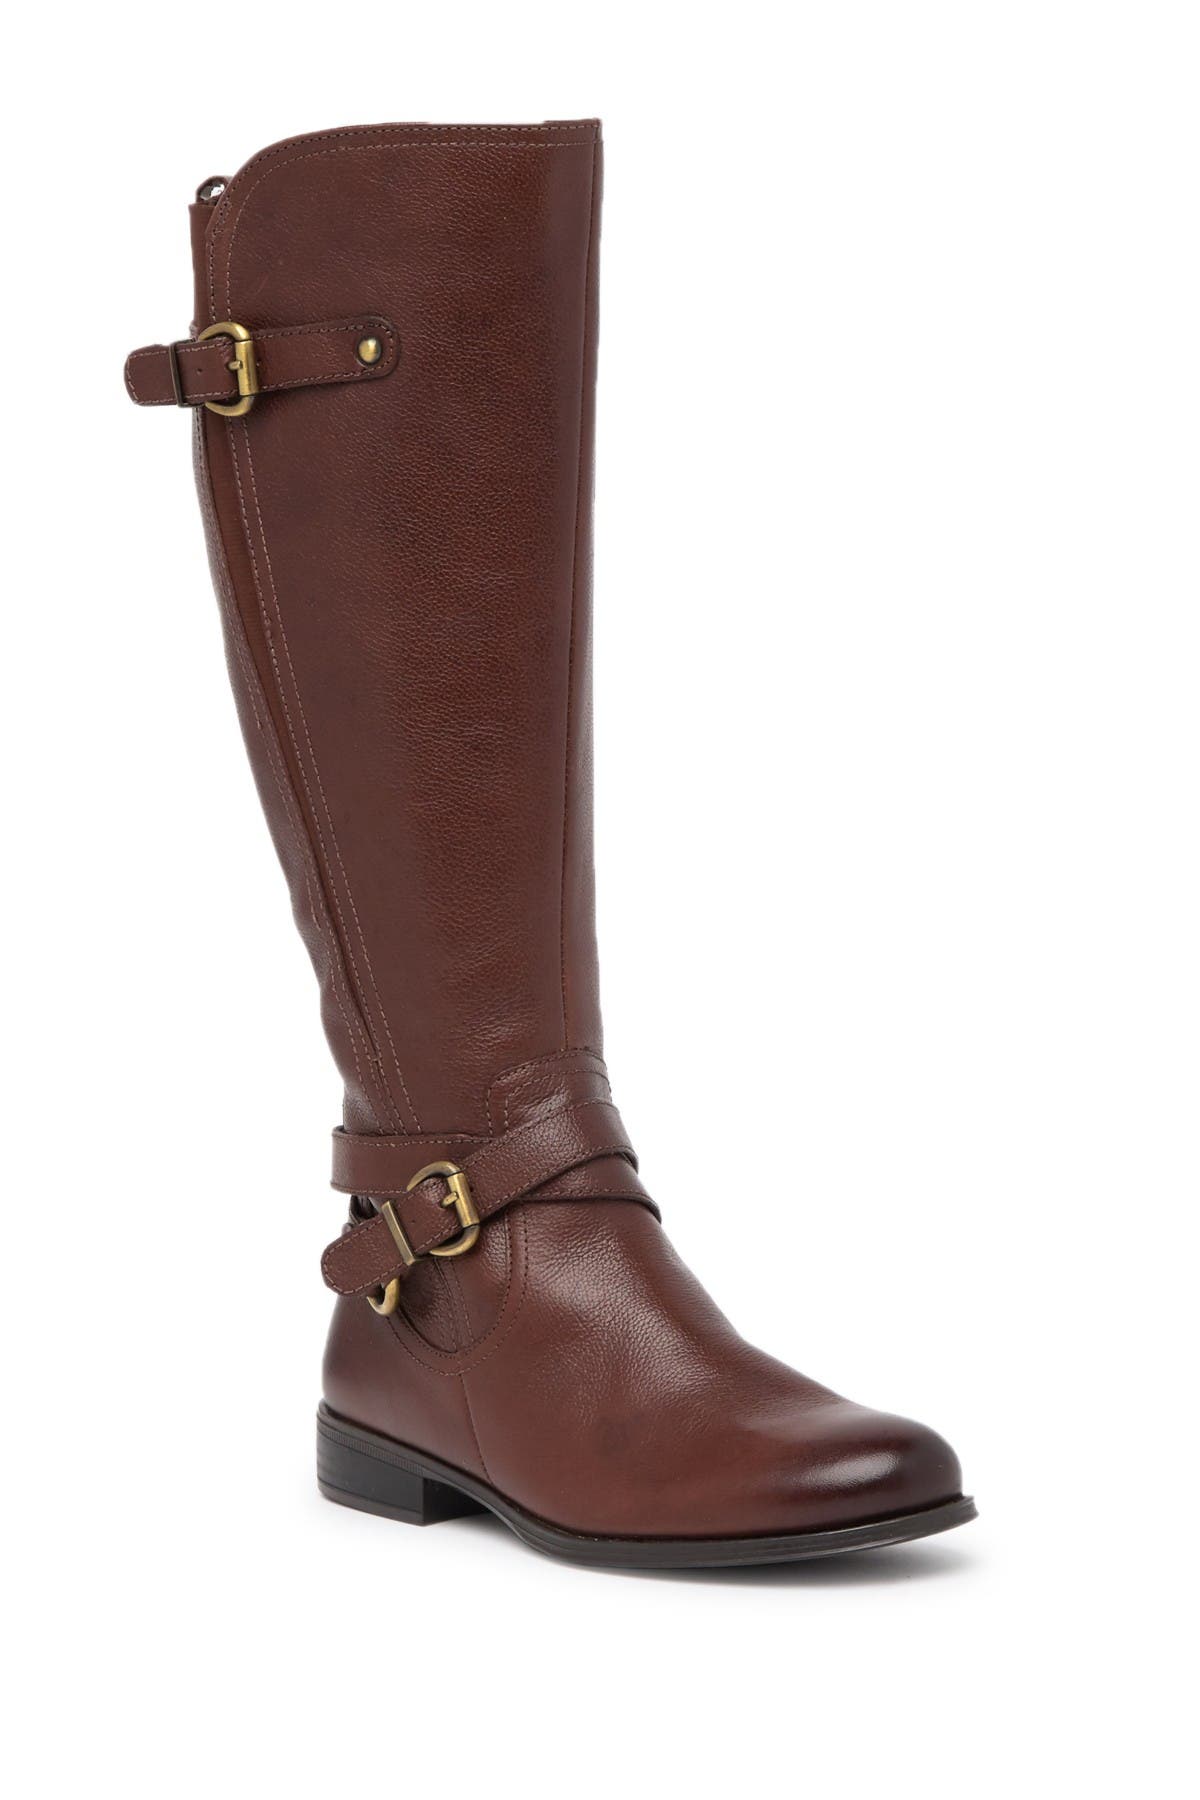 natural soul riding boots